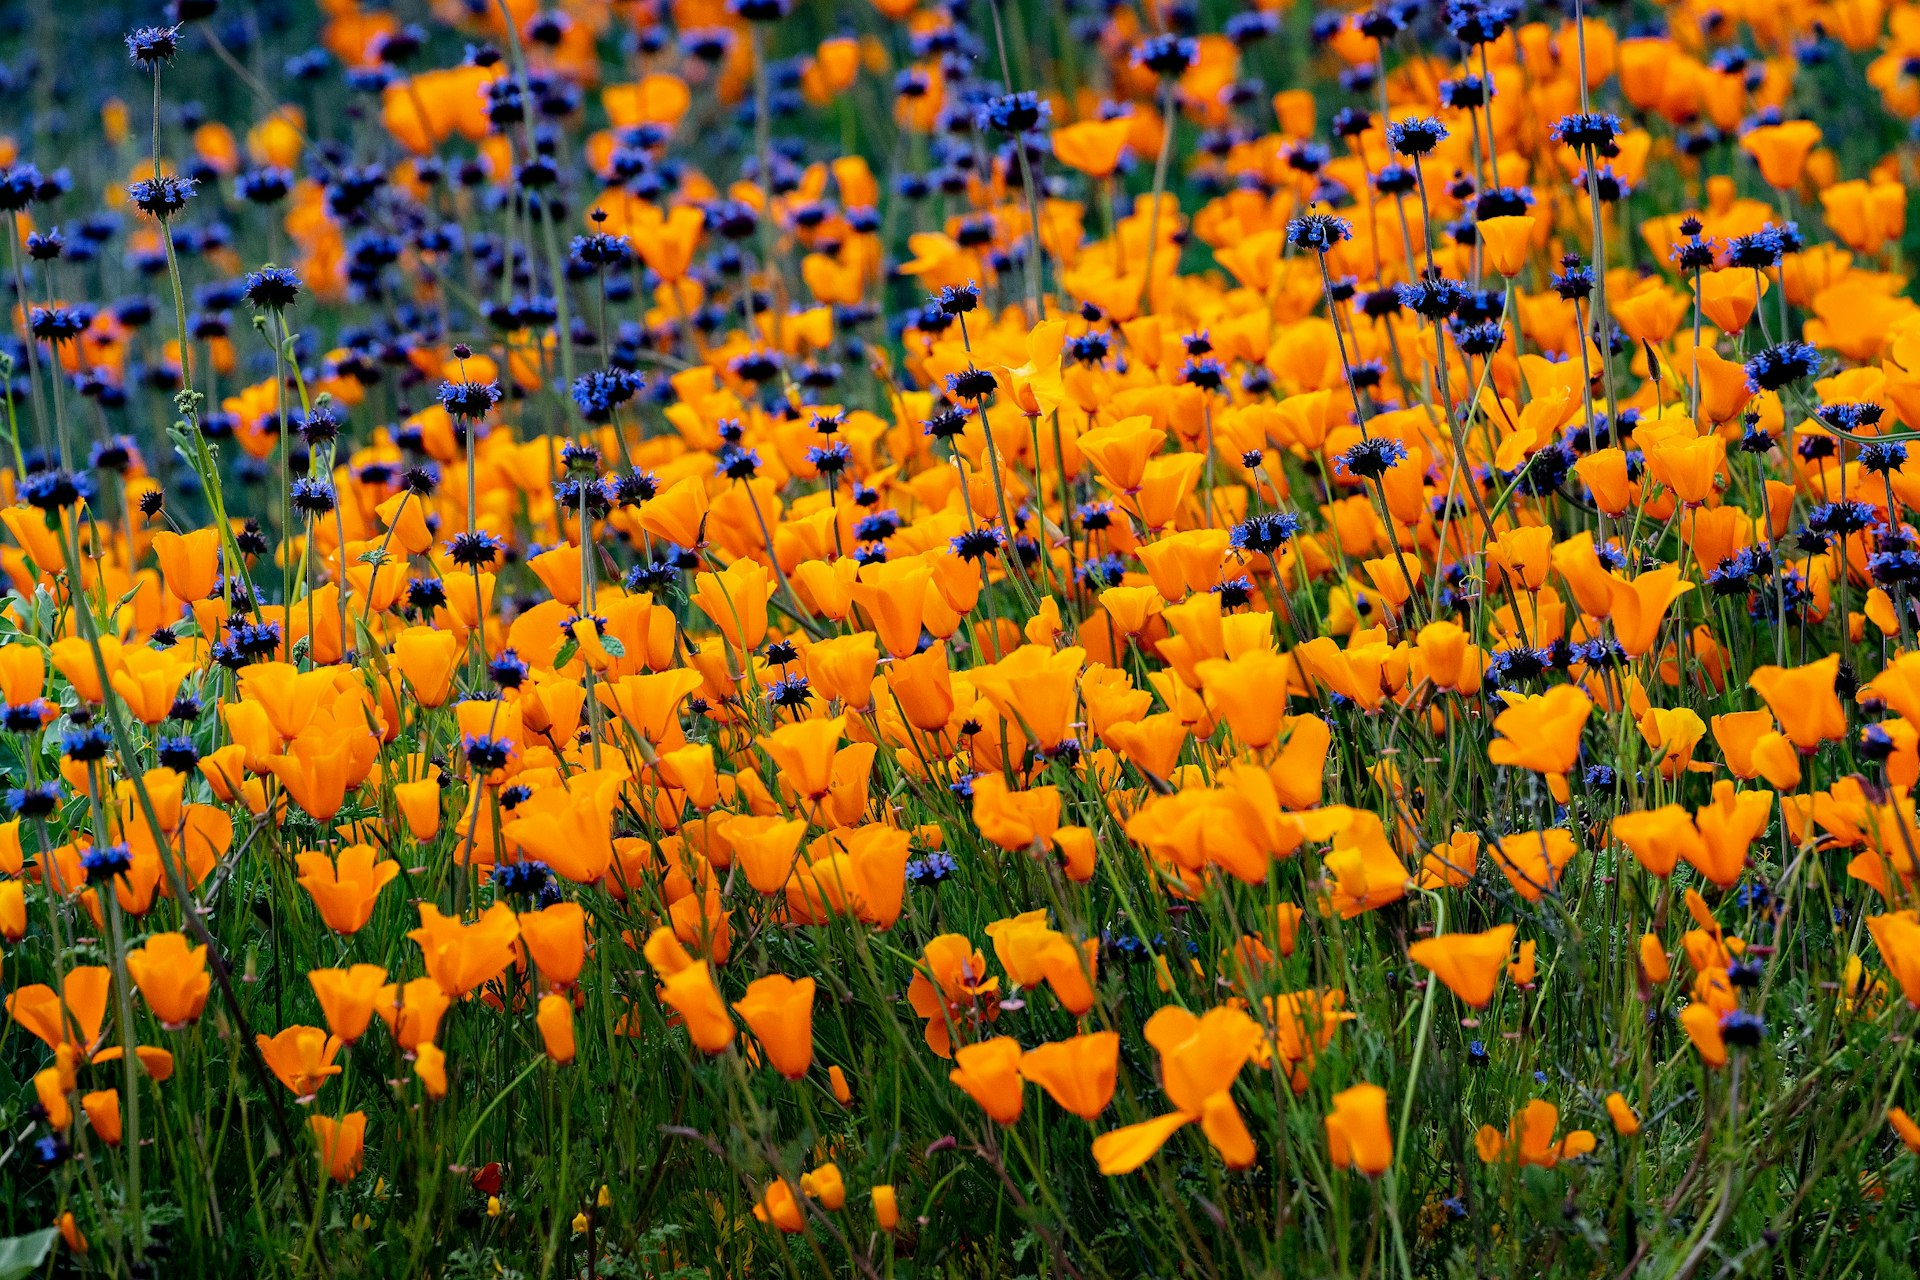 The hillsides of Walker Canyon in California filled with orange and purple poppies 